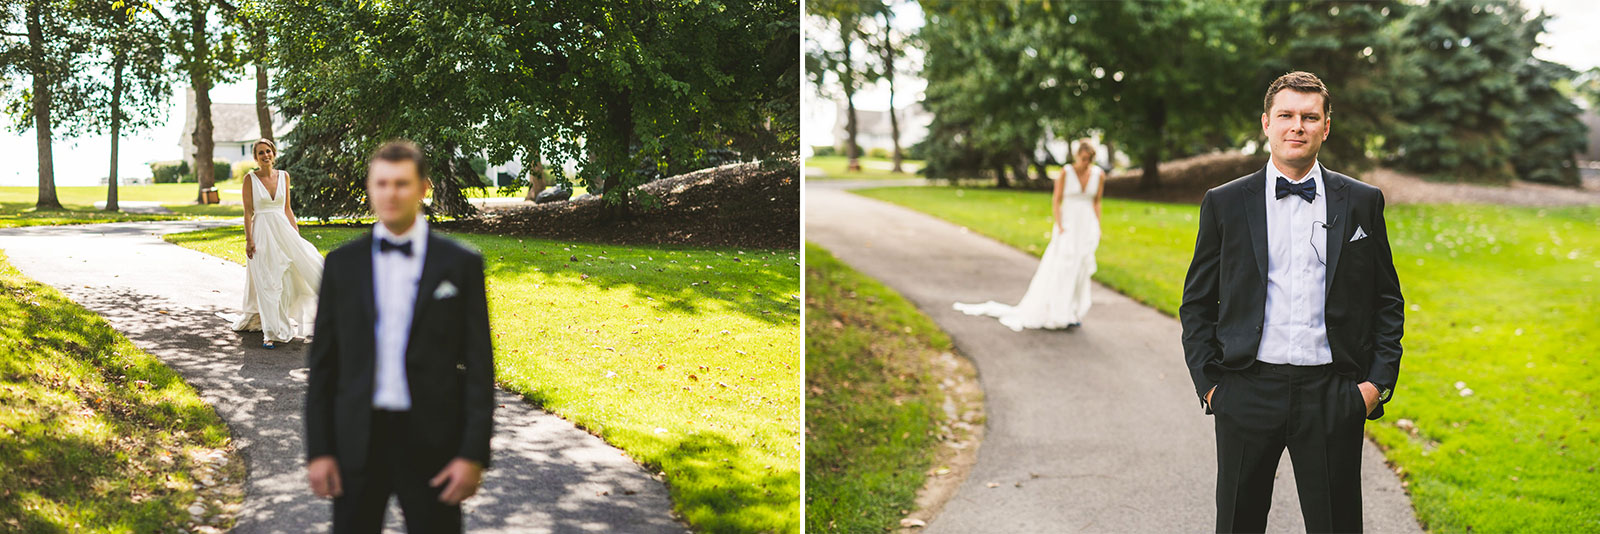 24 waiting for first look at wedding in conway farms - Stephanie + Zack // Conway Farms Chicago Wedding Photographers